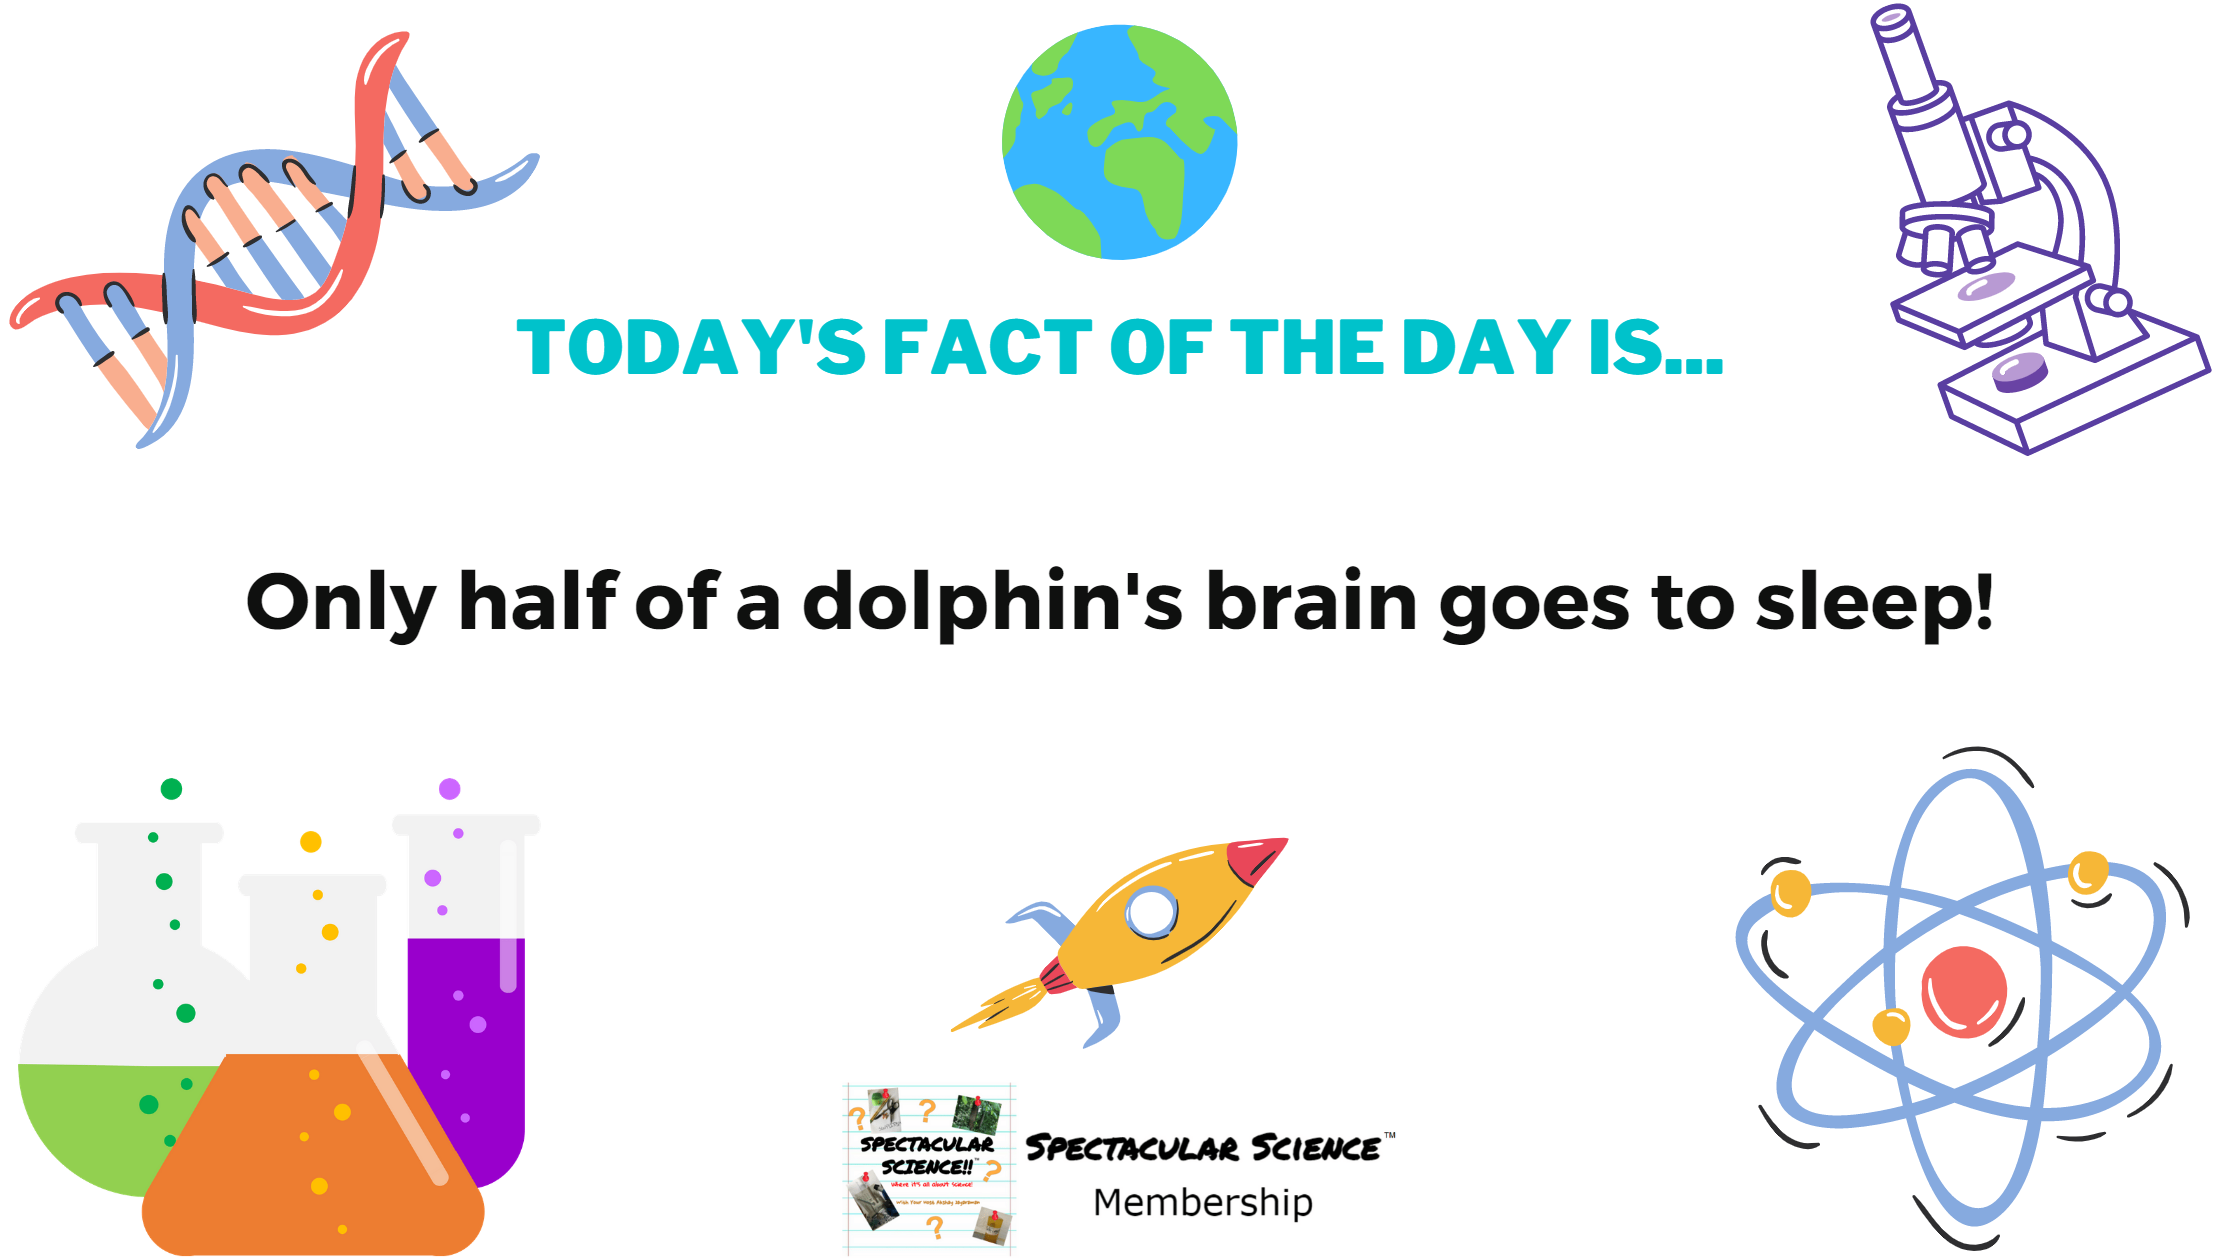 Fact of the Day Image January 16th